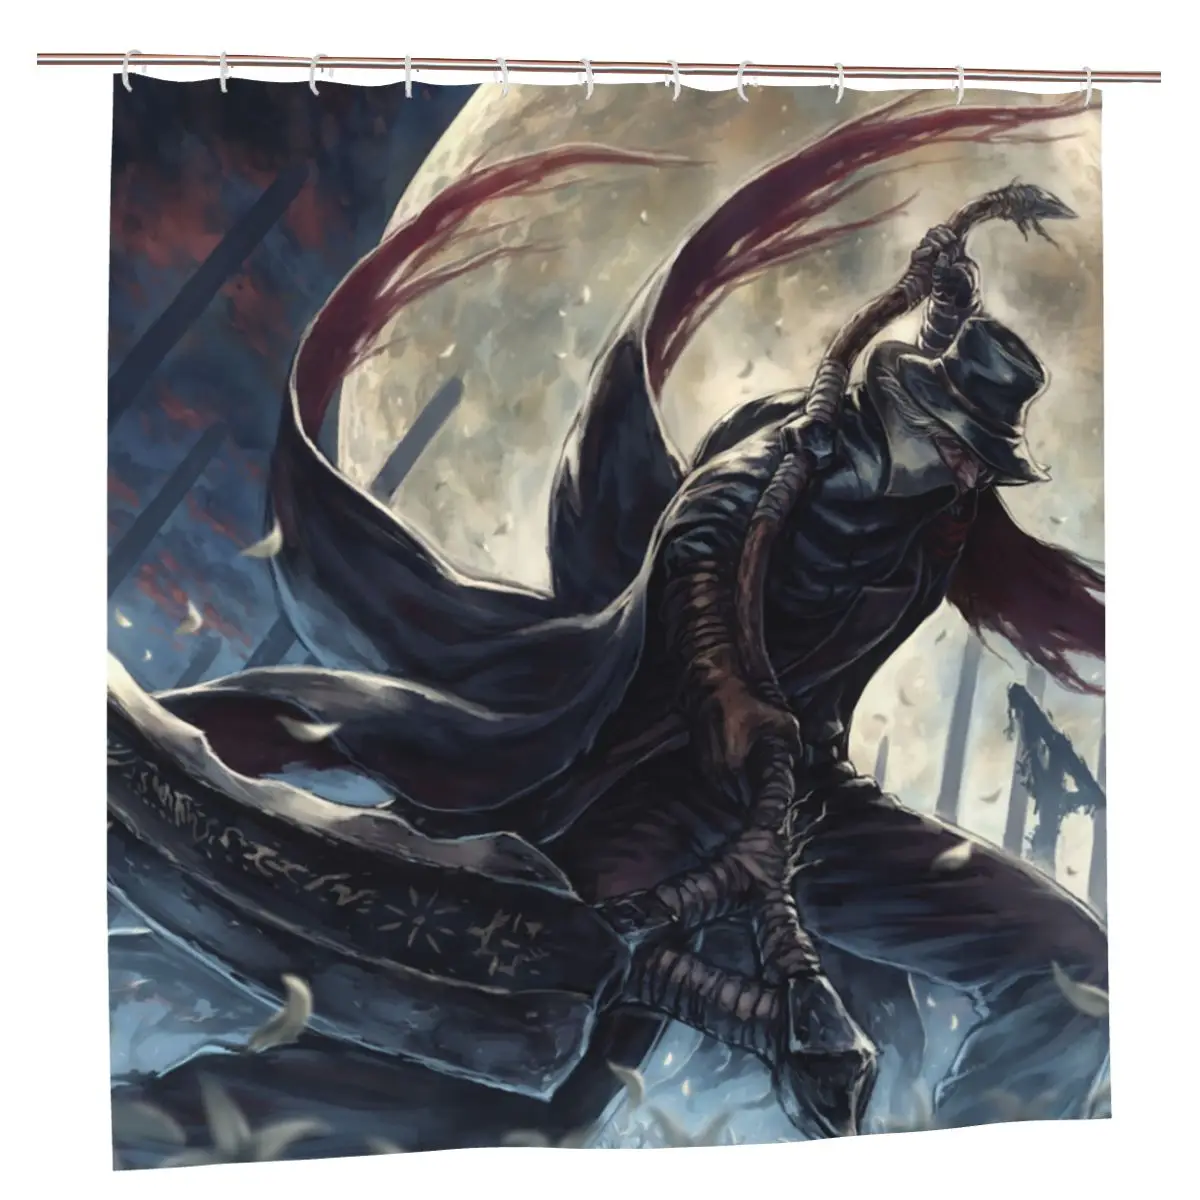 

Bloodborne Shower Curtain Home Bath Curtains with 12pcs Hooks Bathing Screen The Old Hunters Sickle Action Curtain 183*183cm